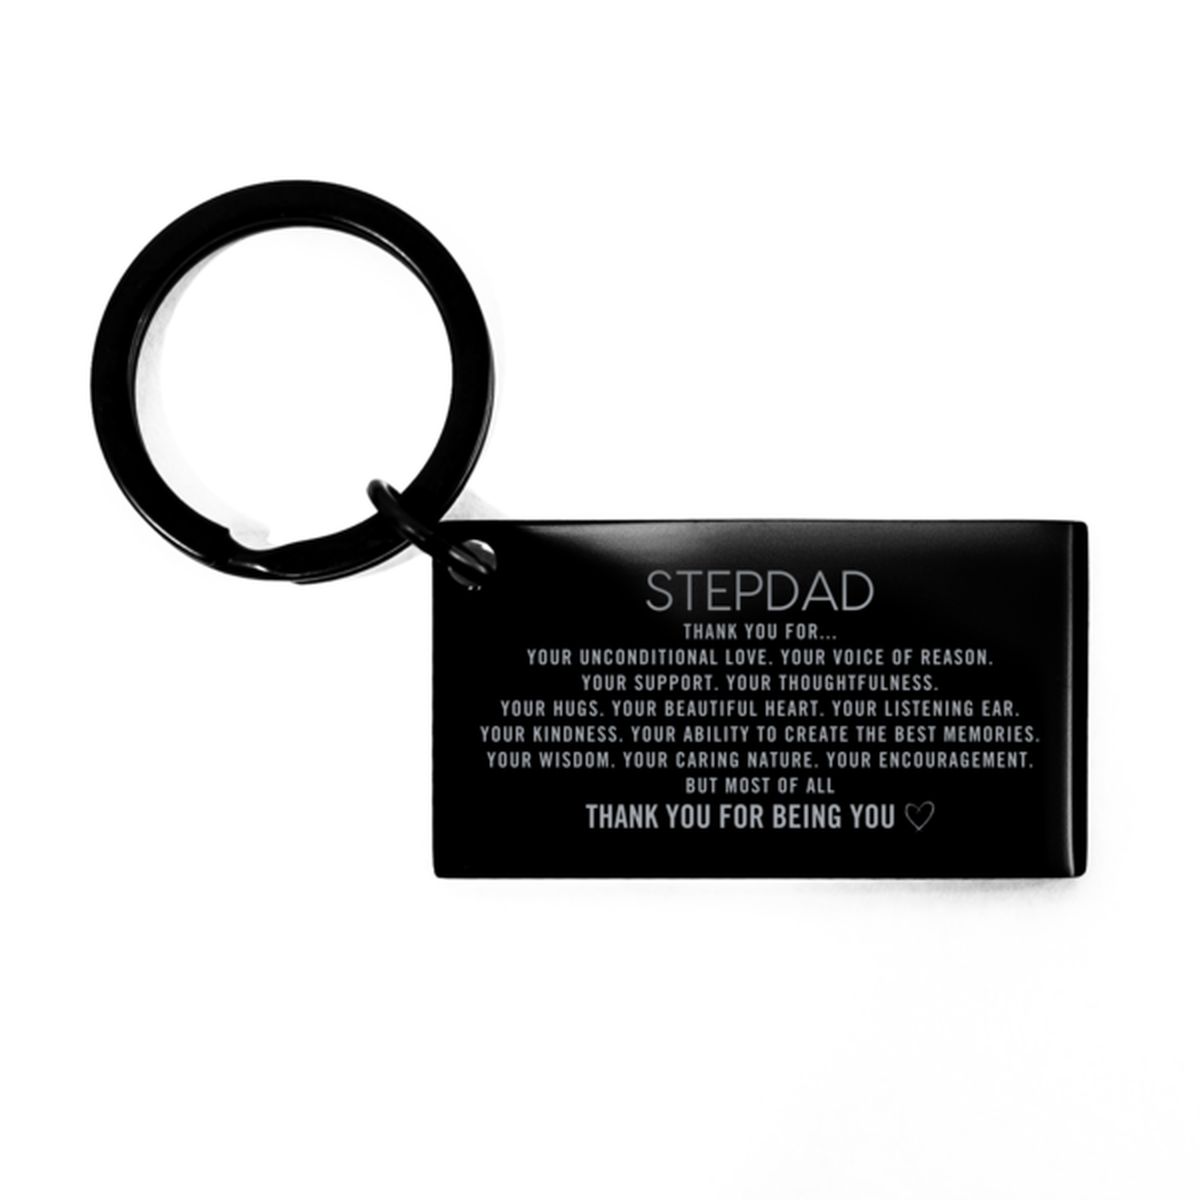 Stepdad Keychain Custom, Engraved Gifts For Stepdad Christmas Graduation Birthday Gifts for Men Women Stepdad Thank you for Your unconditional love